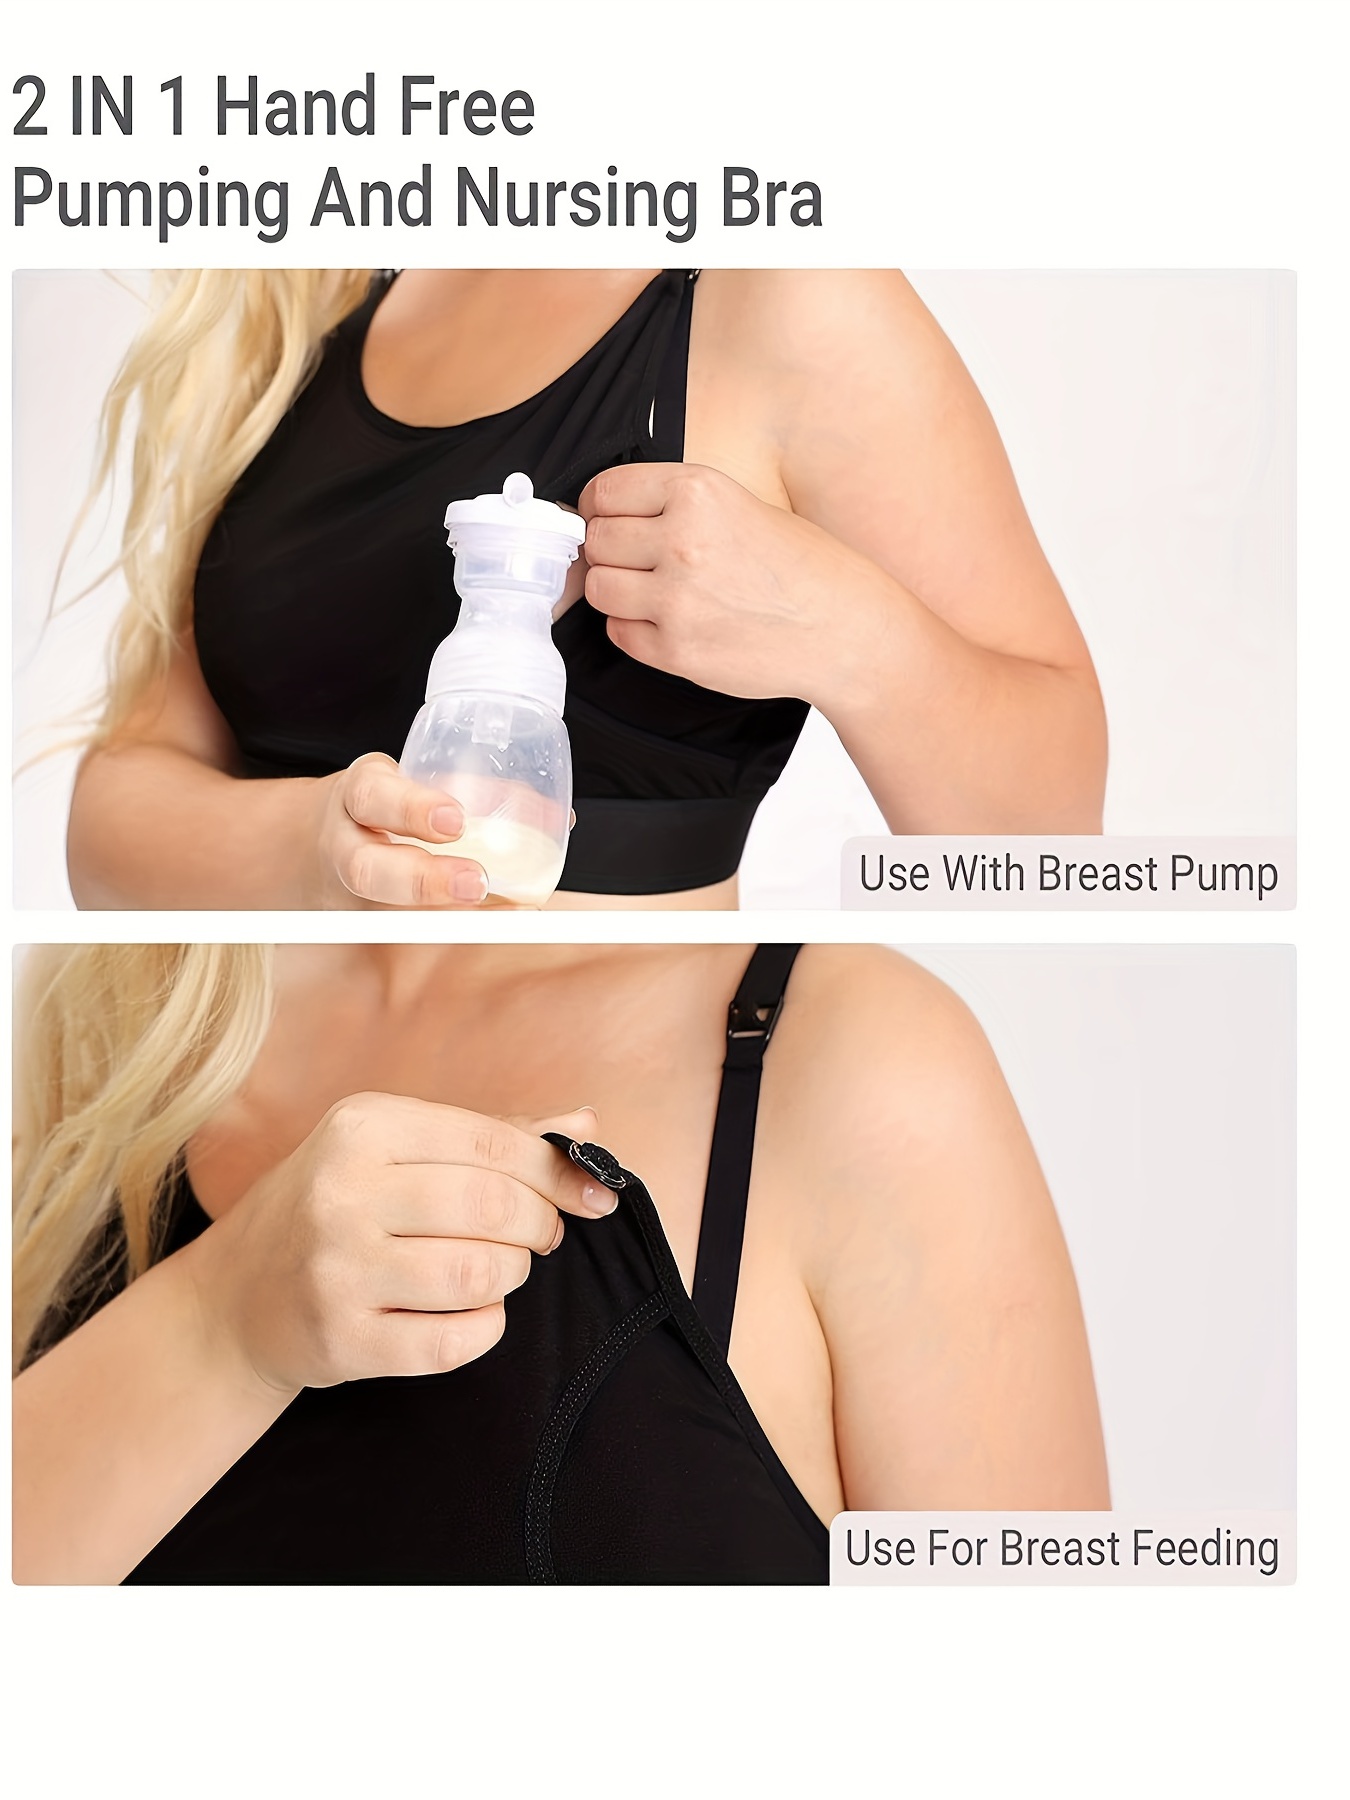 Buy Hands-Free Pumping Bra and Nursing Bra, Adjustable Breastfeeding Bra,  Suitable for Holding Breast Pumps, S-XXL,S, Black at